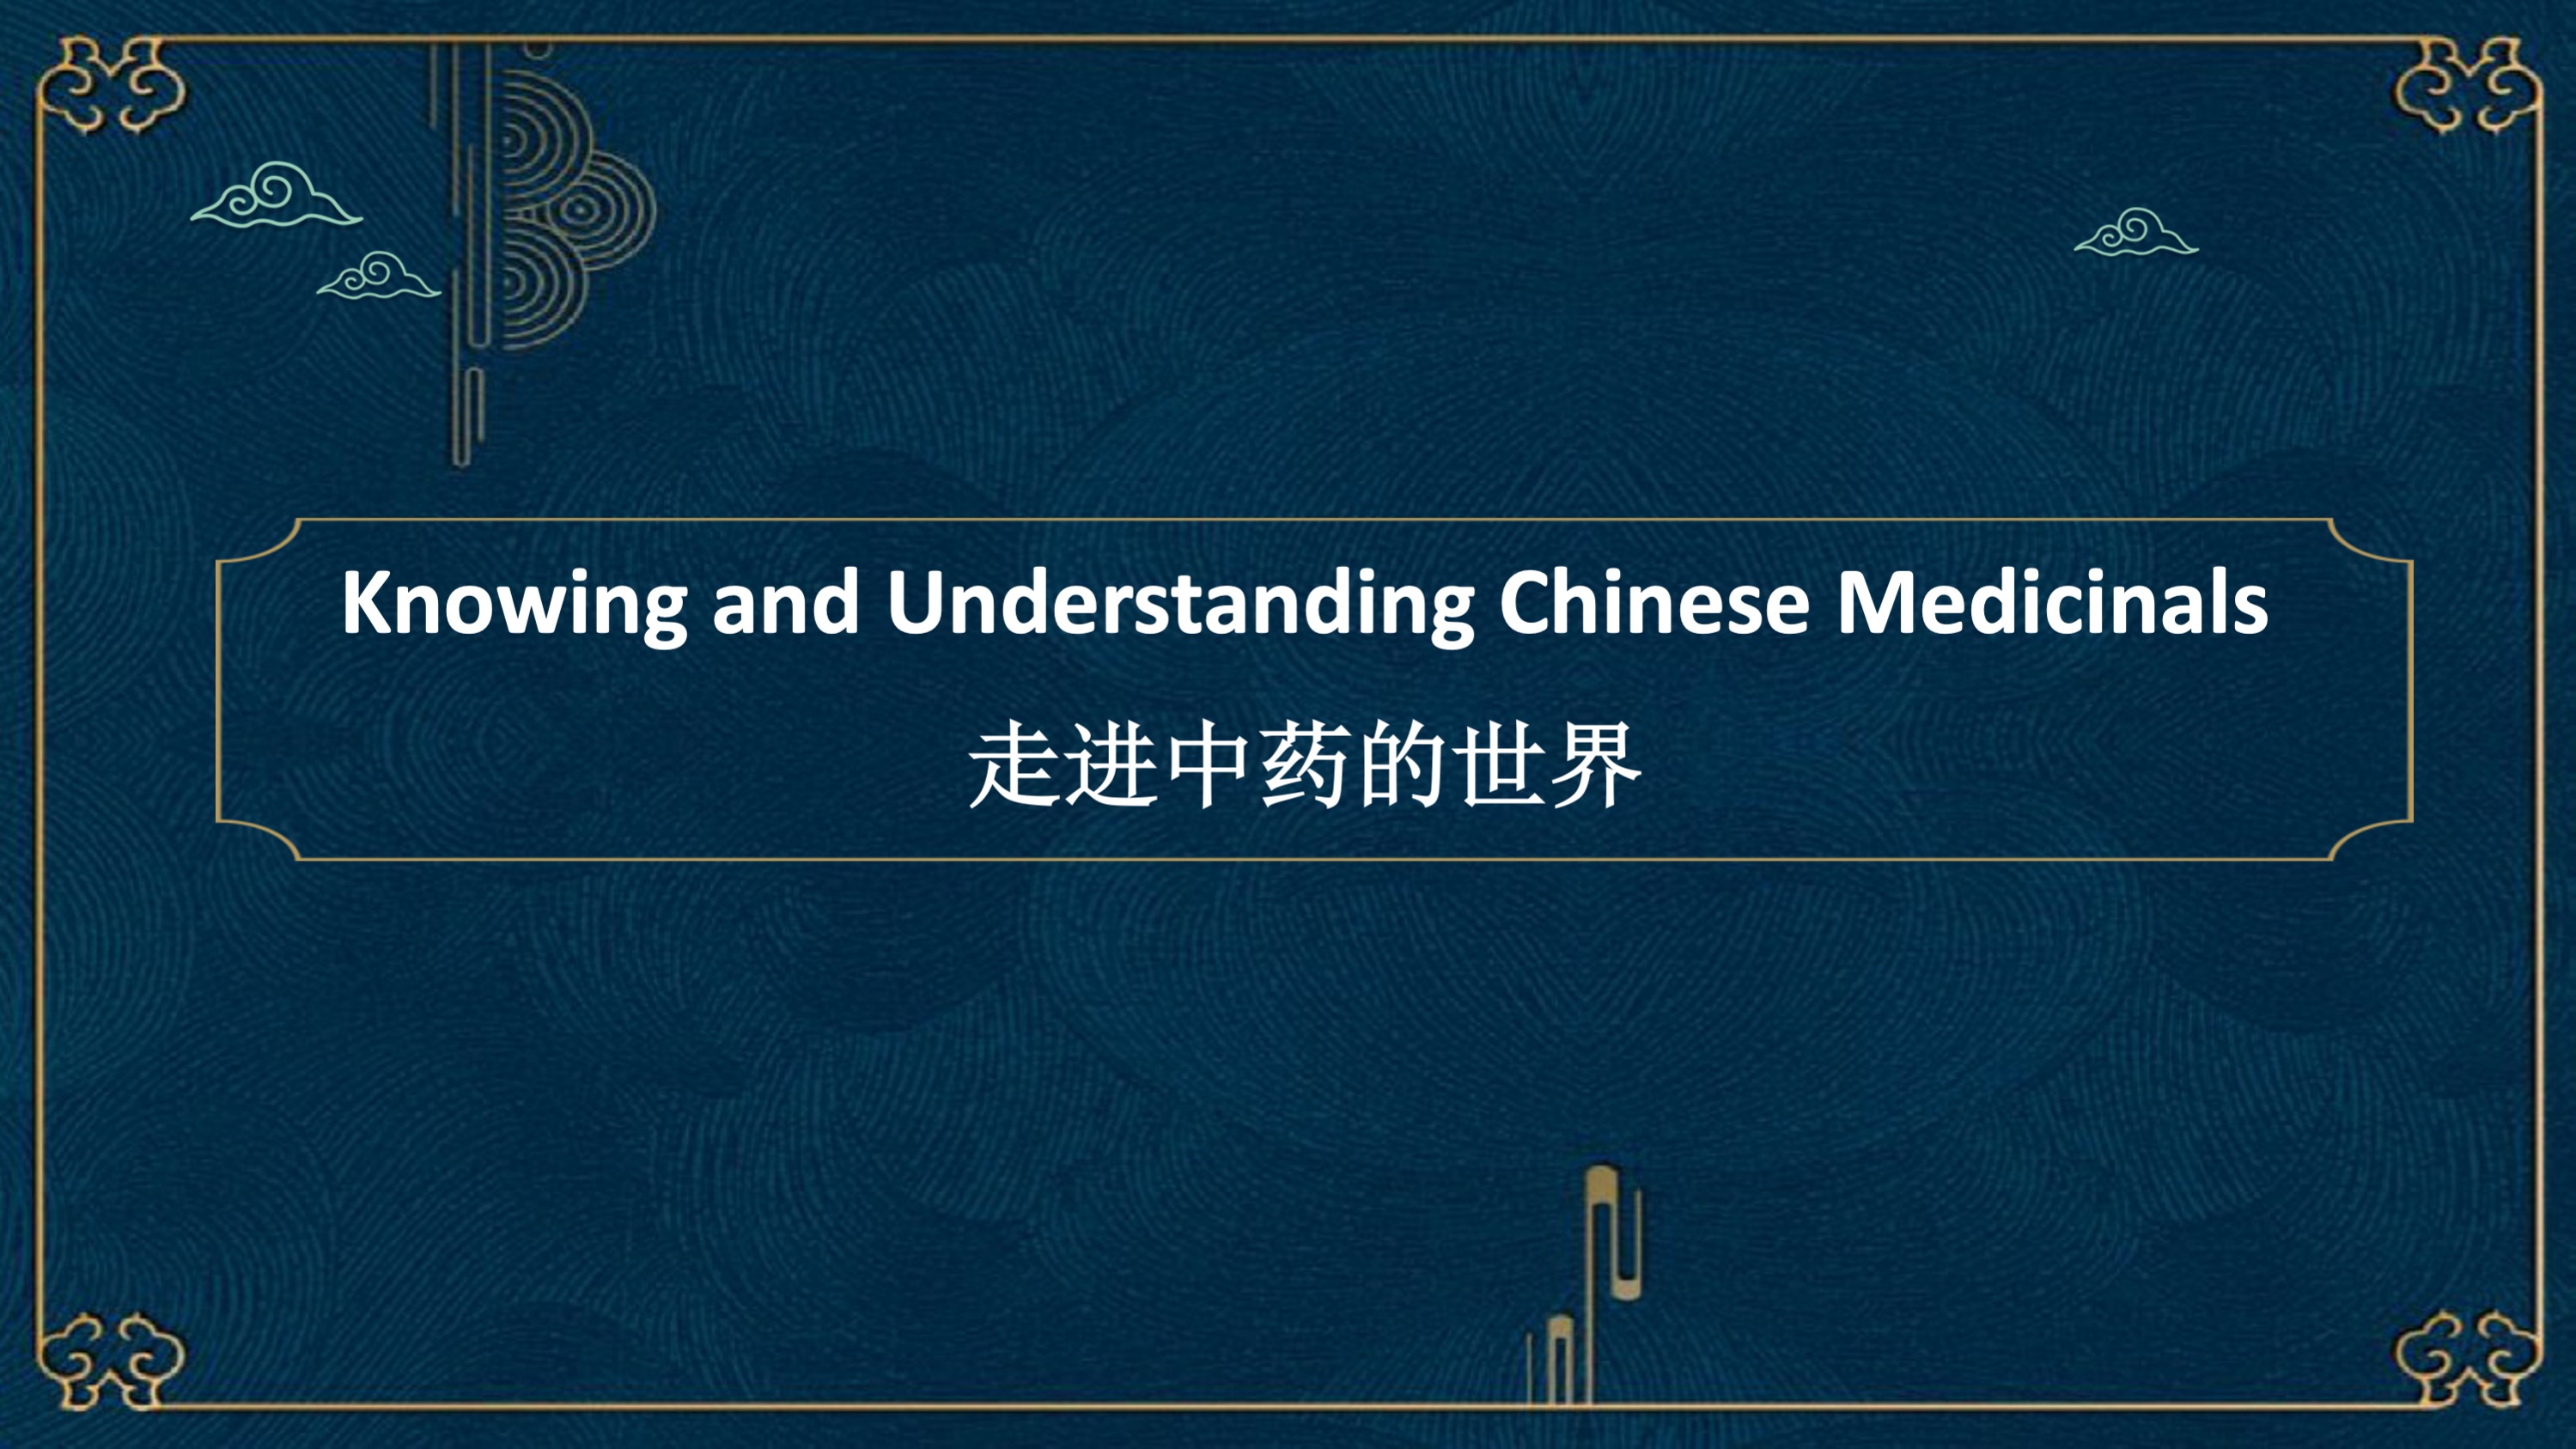 Knowing and Understanding Chinese Medicinals